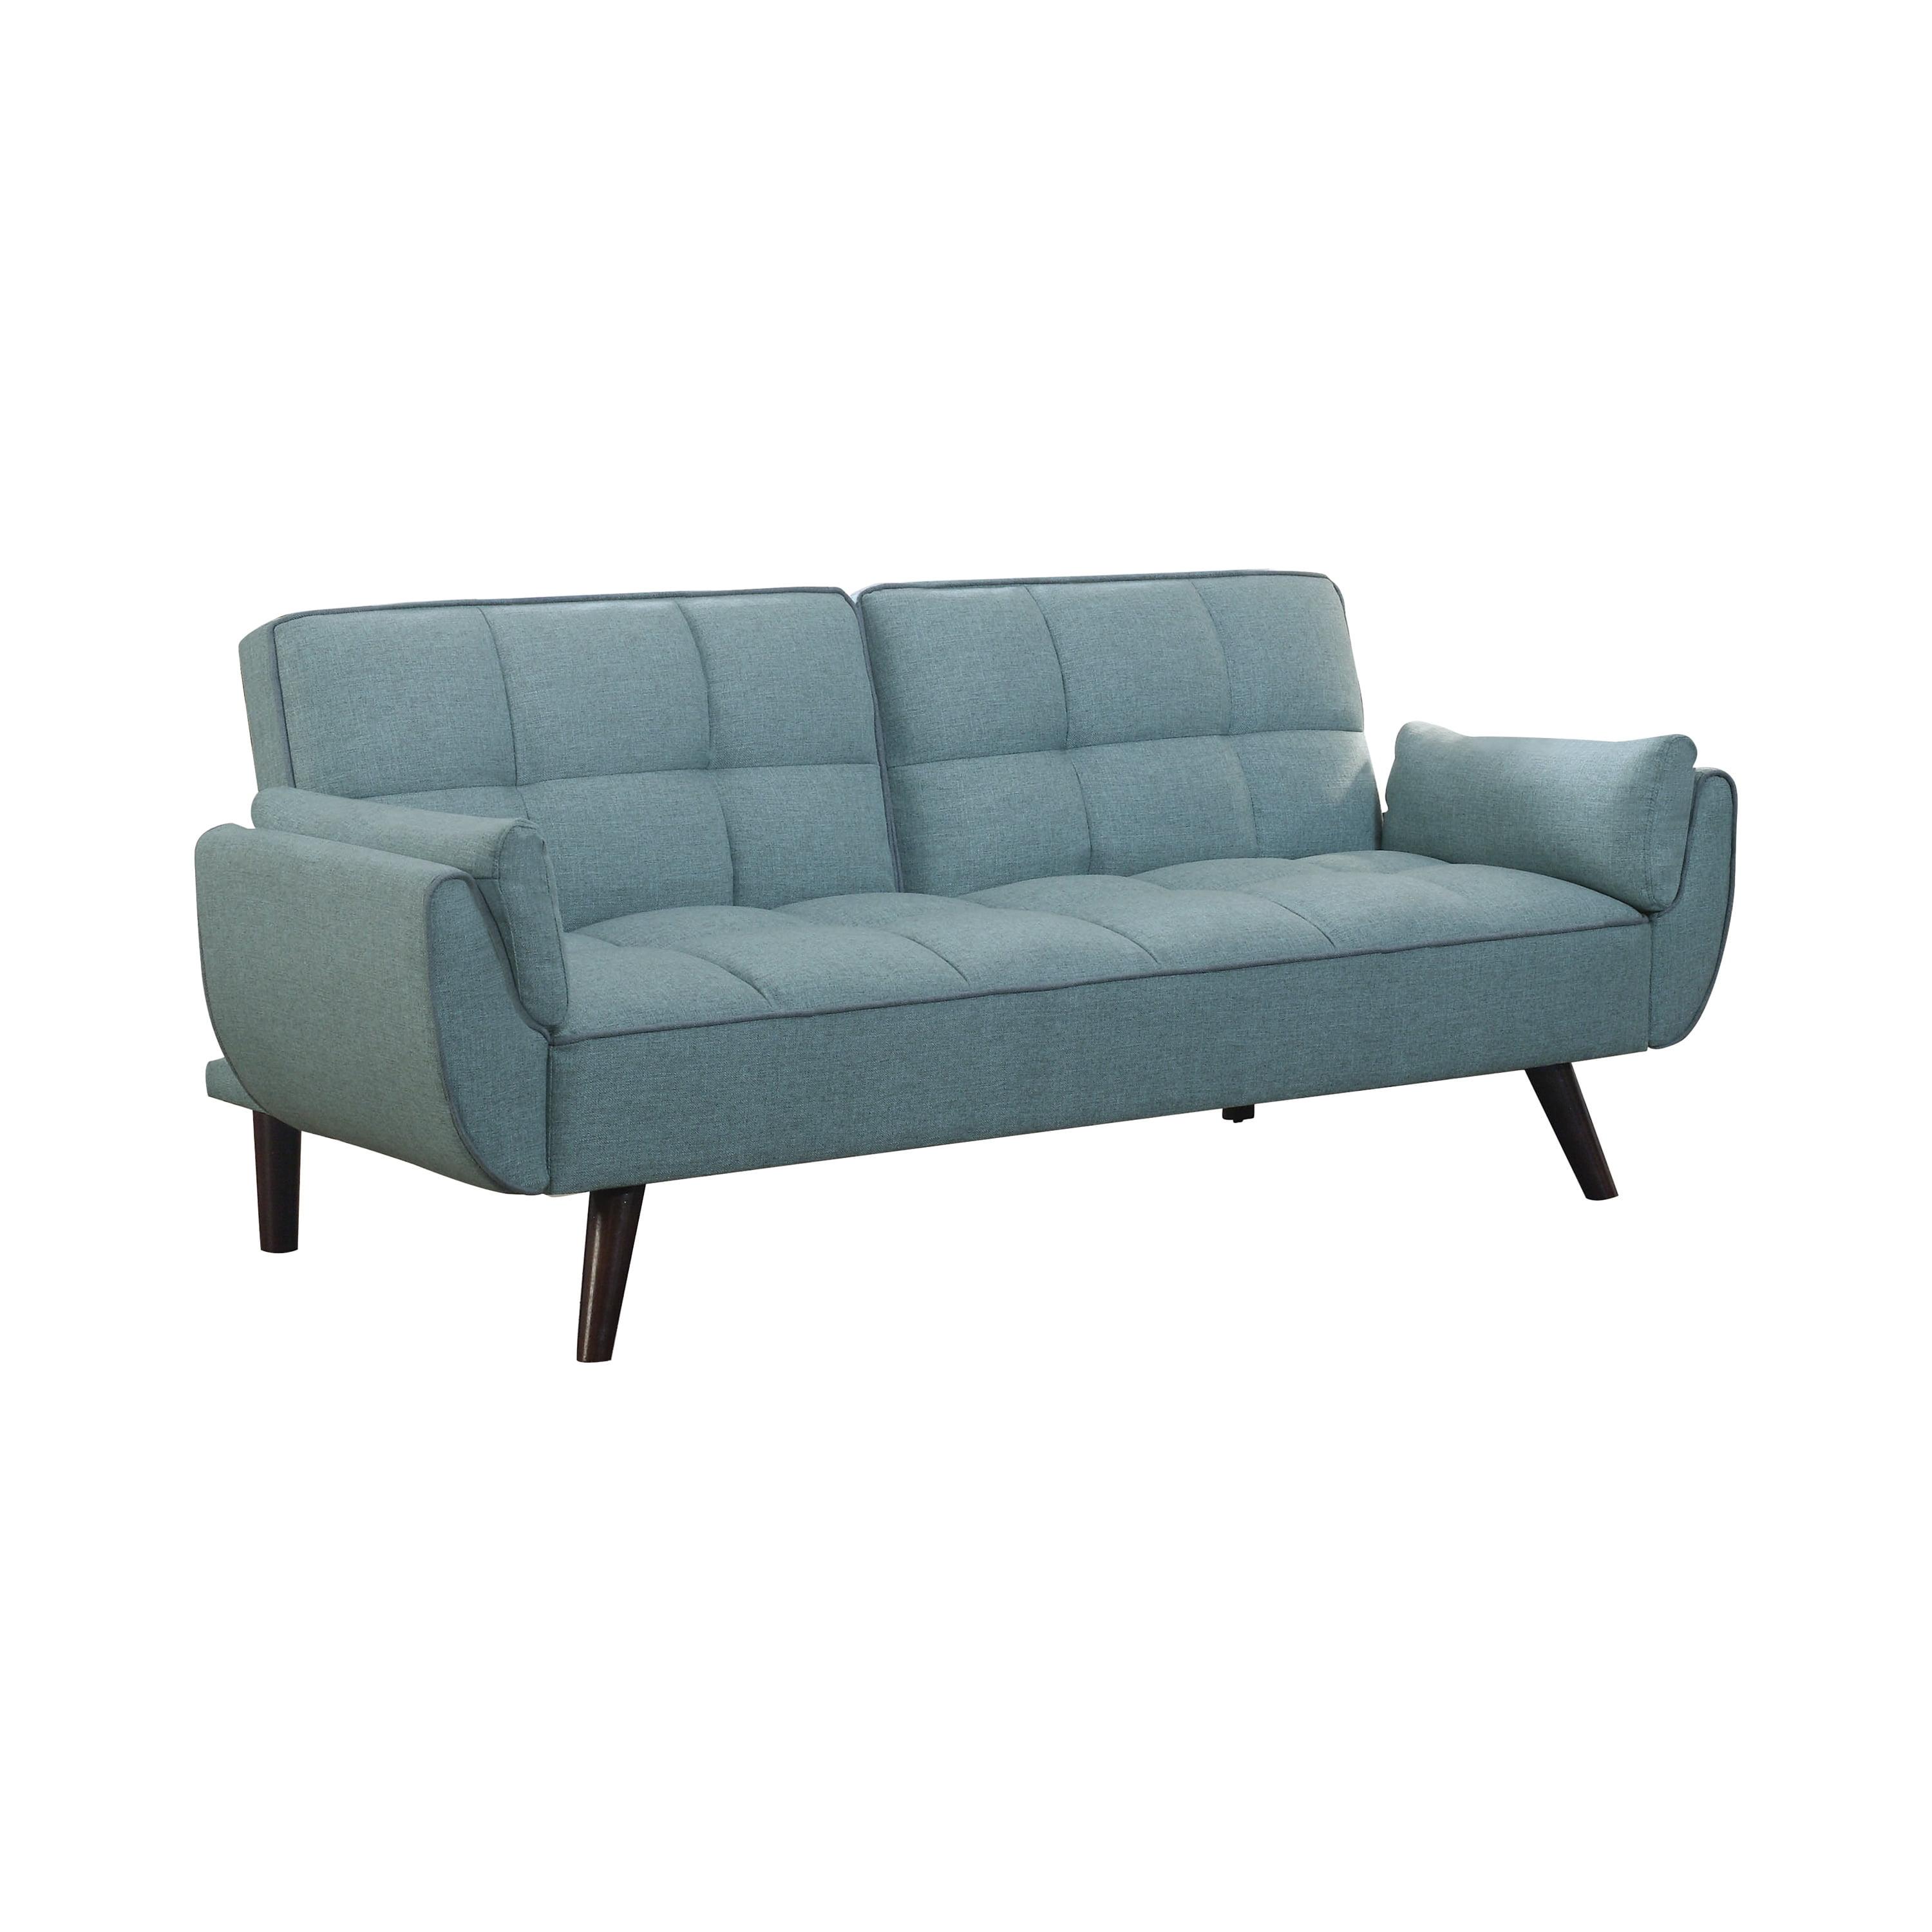 Transitional Turquoise Blue Queen Sleeper Sofa with Tufted Pillow-Top